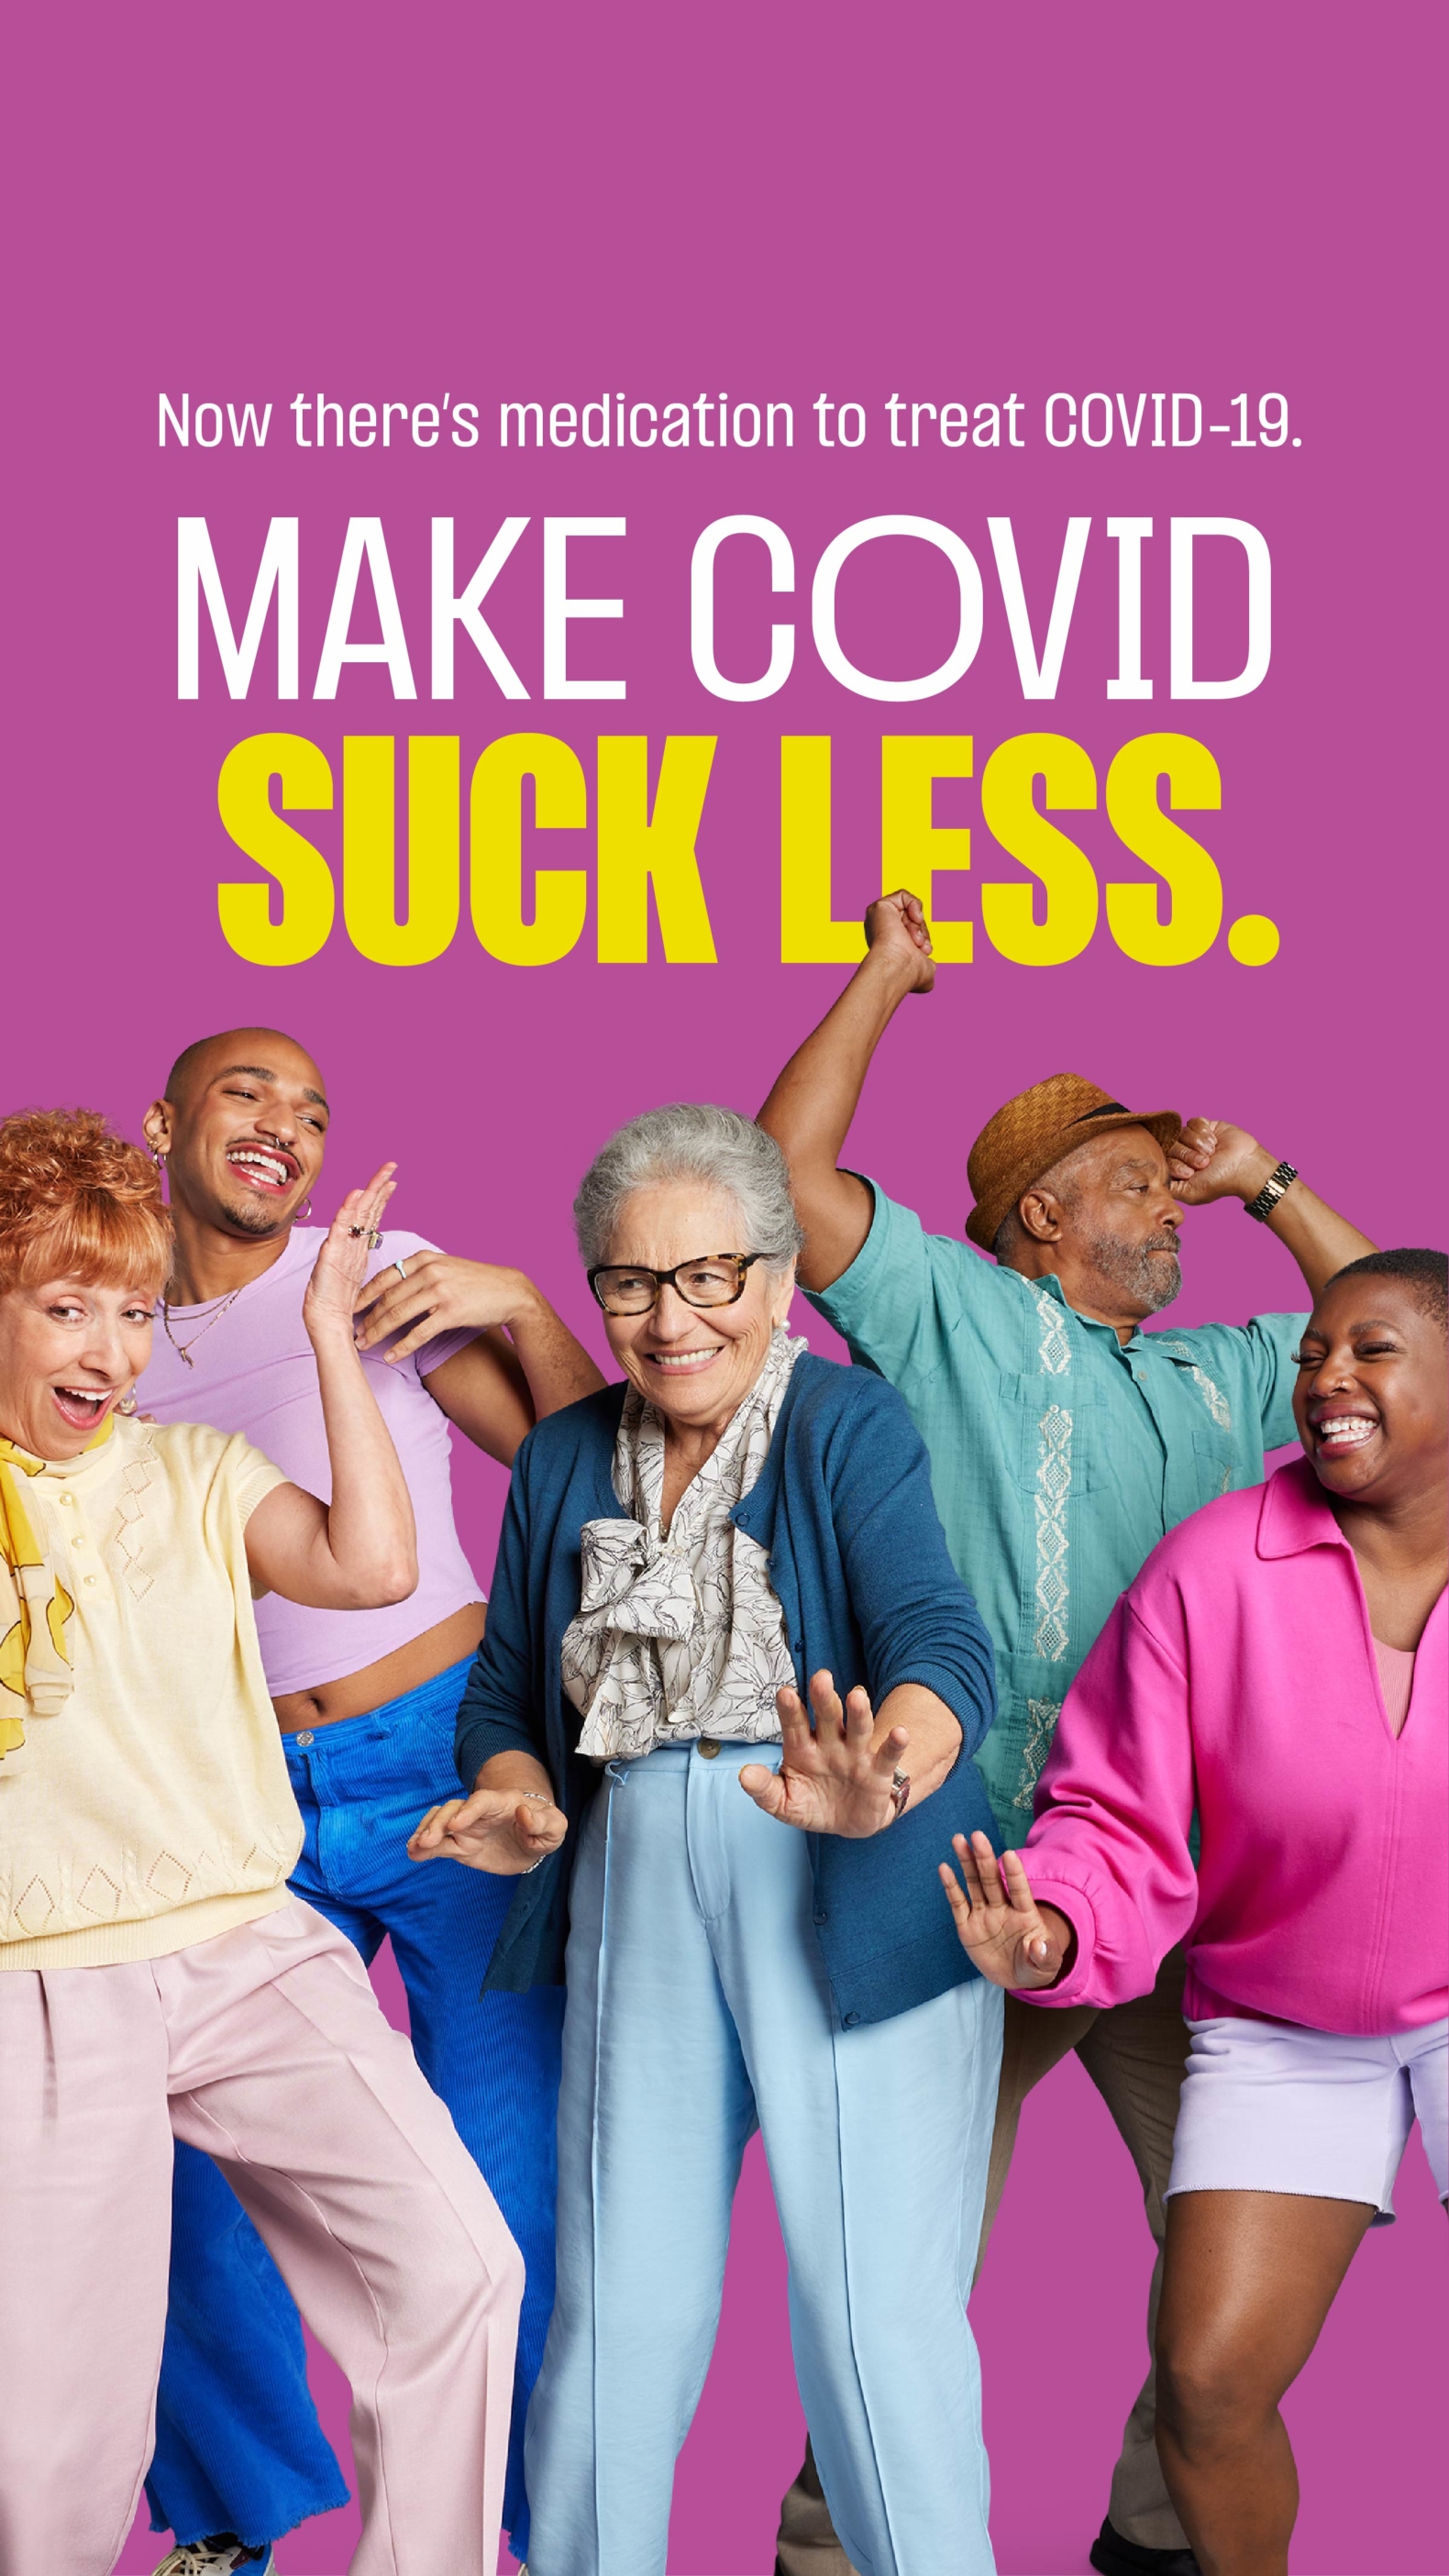 Ad with a bright pink background featuring a group of five people from diverse backgrounds in various celebration poses. The first woman on the left wears a light yellow t-shirt and light pink slacks, behind her to the right is a man wearing a lavender t-shirt and cobalt blue pants, in the center is an elder woman / grandma-type wearing a dark blue cardigan and light blue slacks, to her right is an older man wearing a brown panama hat and bright teal bowling t-shirt and in front of him to the right is a woman wearing a bright pink jumper and white shorts. Above them are two lines of copy, the top line, in small white type, reads, “Now there’s medication to treat COVID-19.” Below that in large type, on two lines, the first line being white, the second being bright yellow and bold, reads, “Make COVID”  “Suck Less.”. 